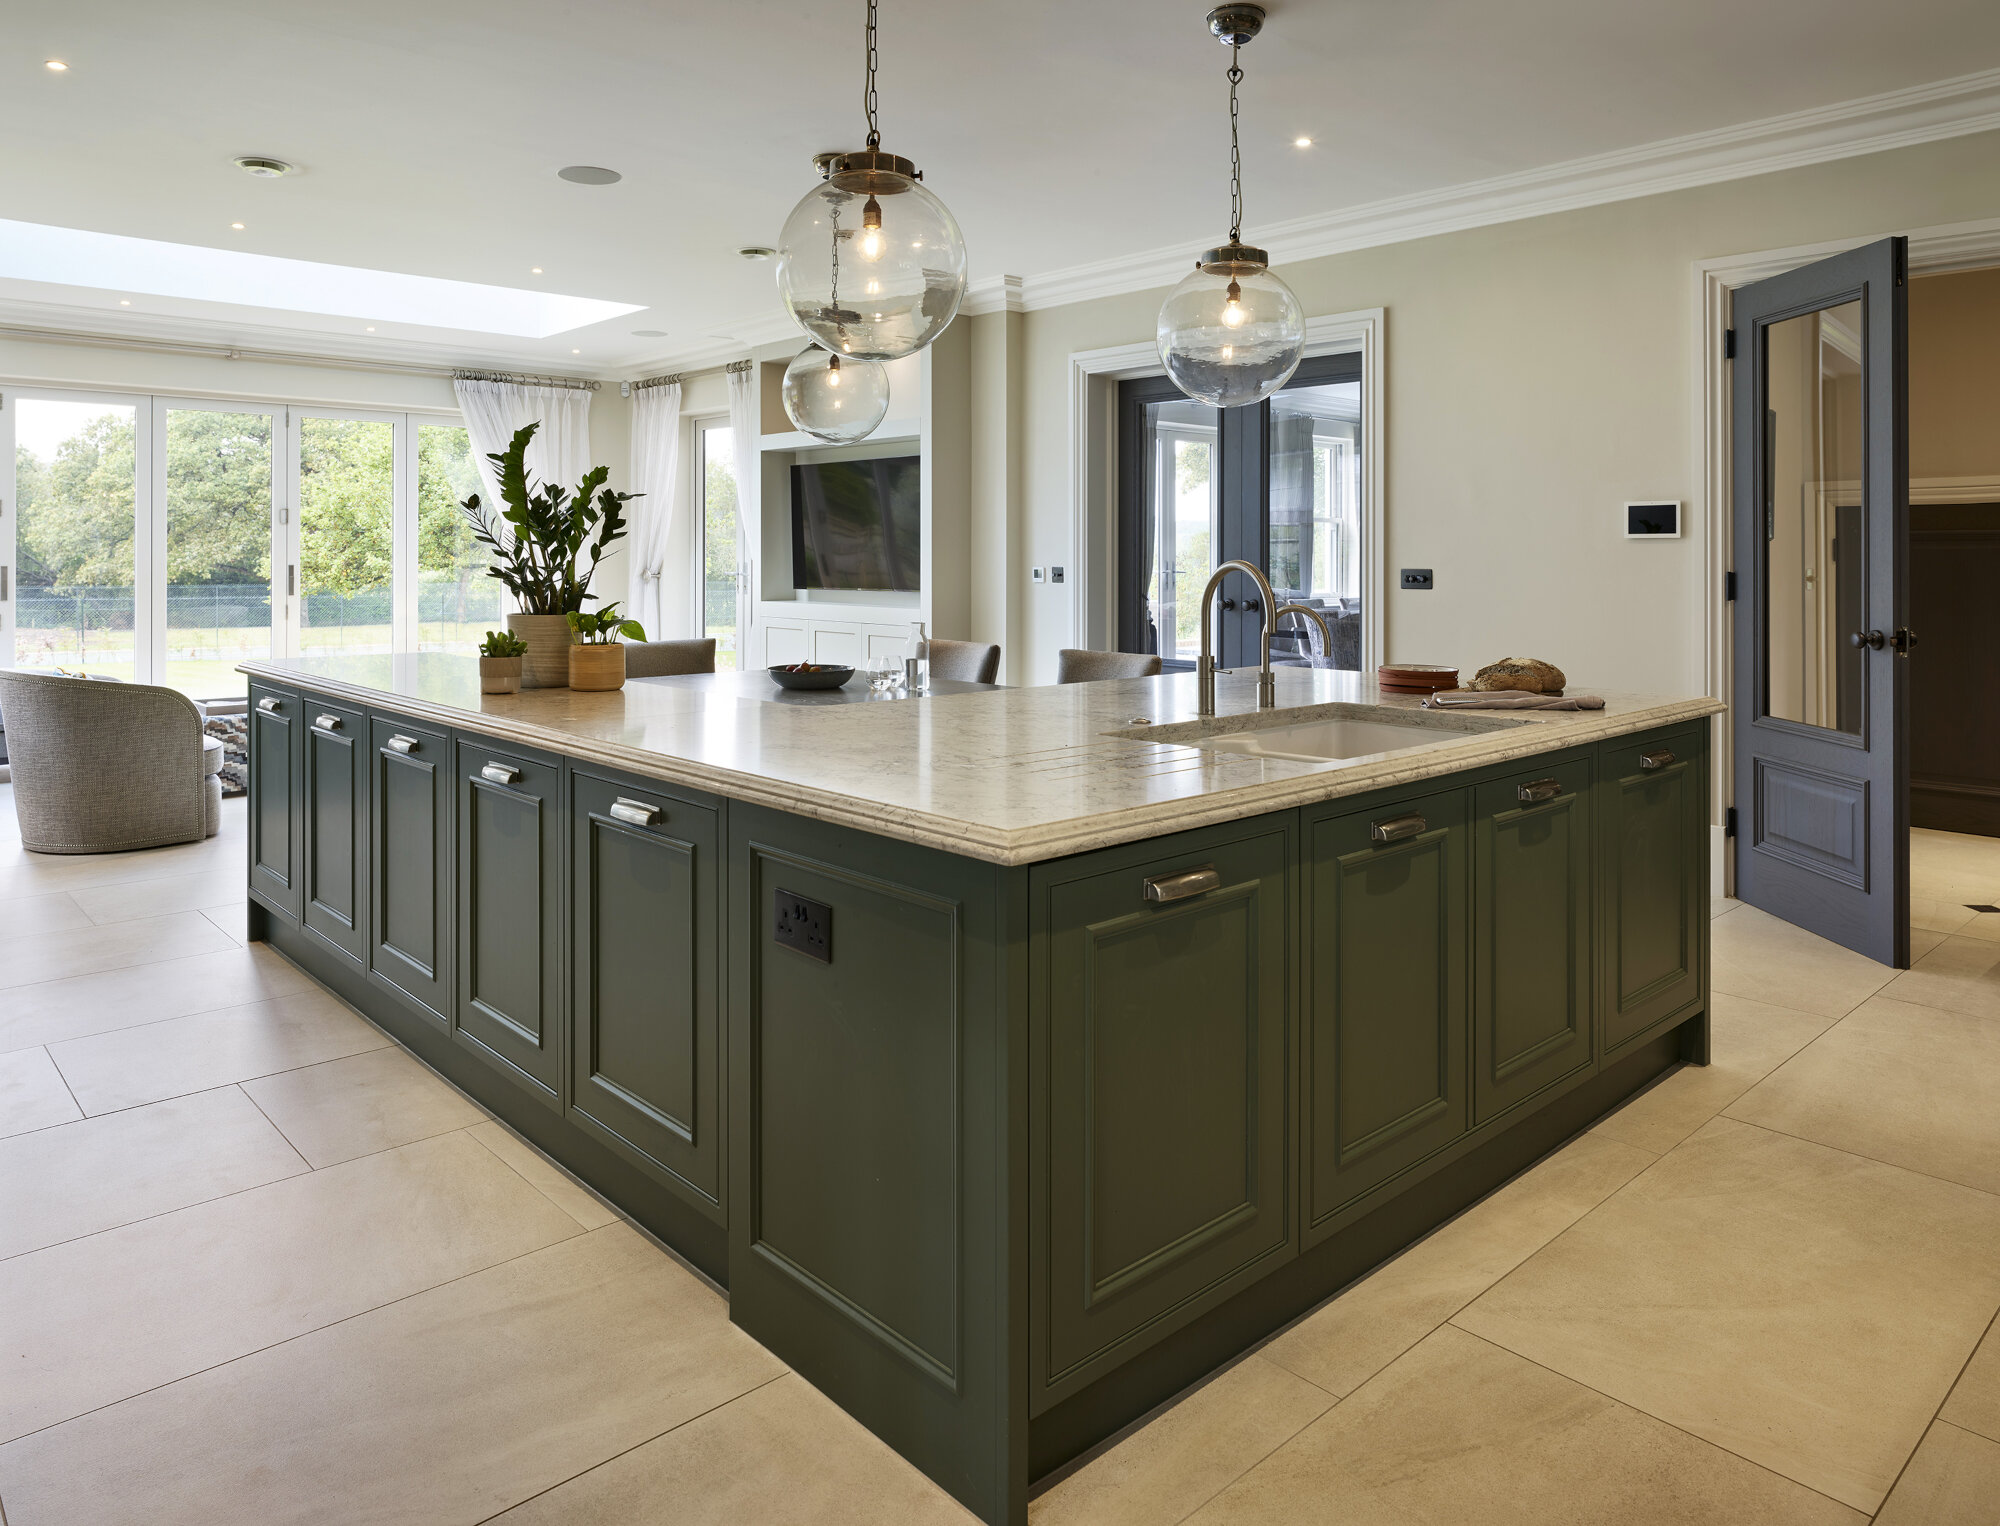 High End traditional Kitchens In Belper